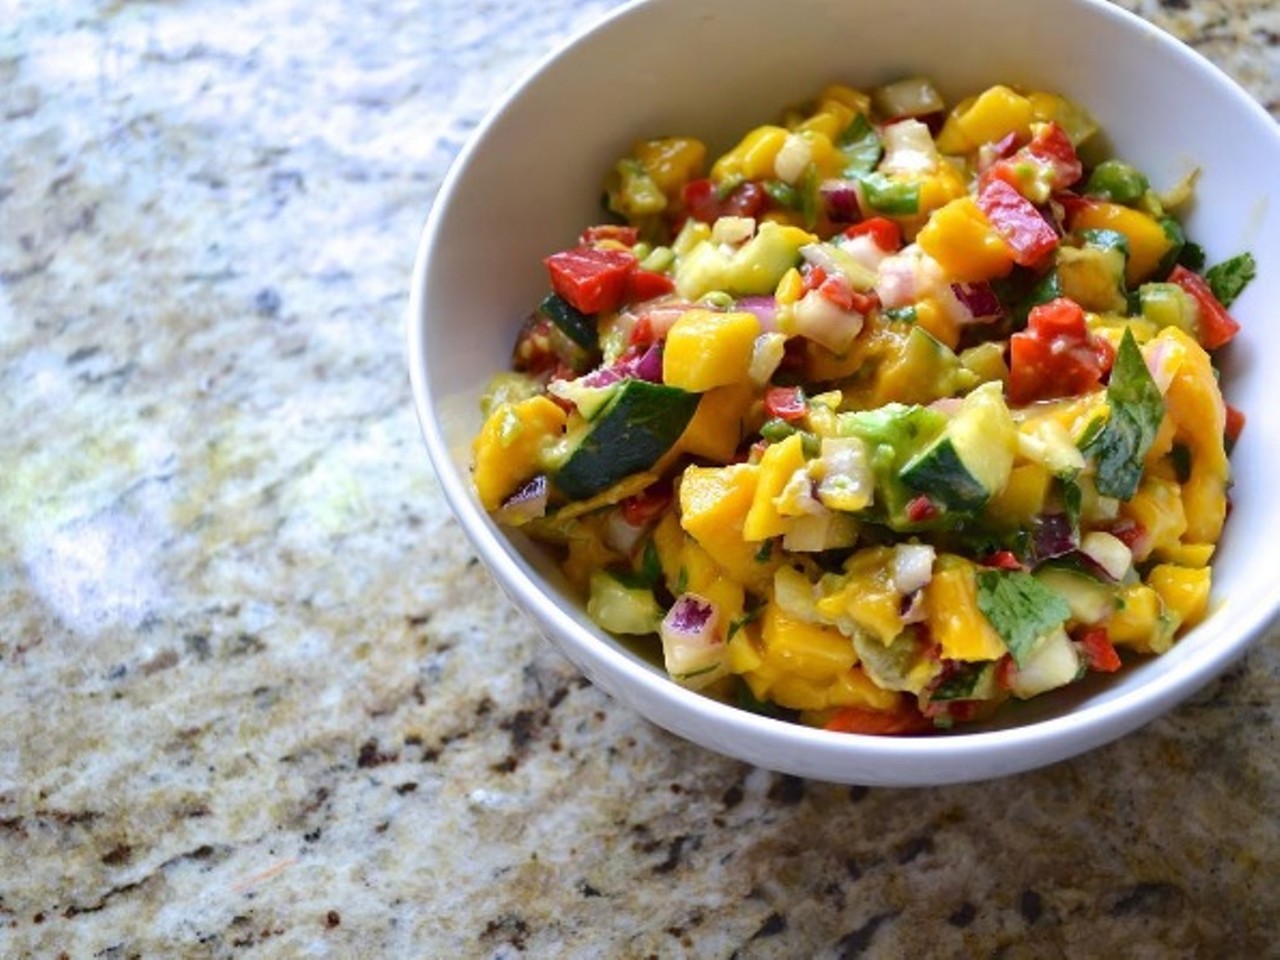 The Ostercamps
Instagram: newlywedchefs
Blog: thenewlywedchefs.com
This husband and wife duo has an entire blog devoted to "keeping a fresh outlook on life, love, and food." This photo features their mango salsa. Photo courtesy of Instagram / newlywedchefs.